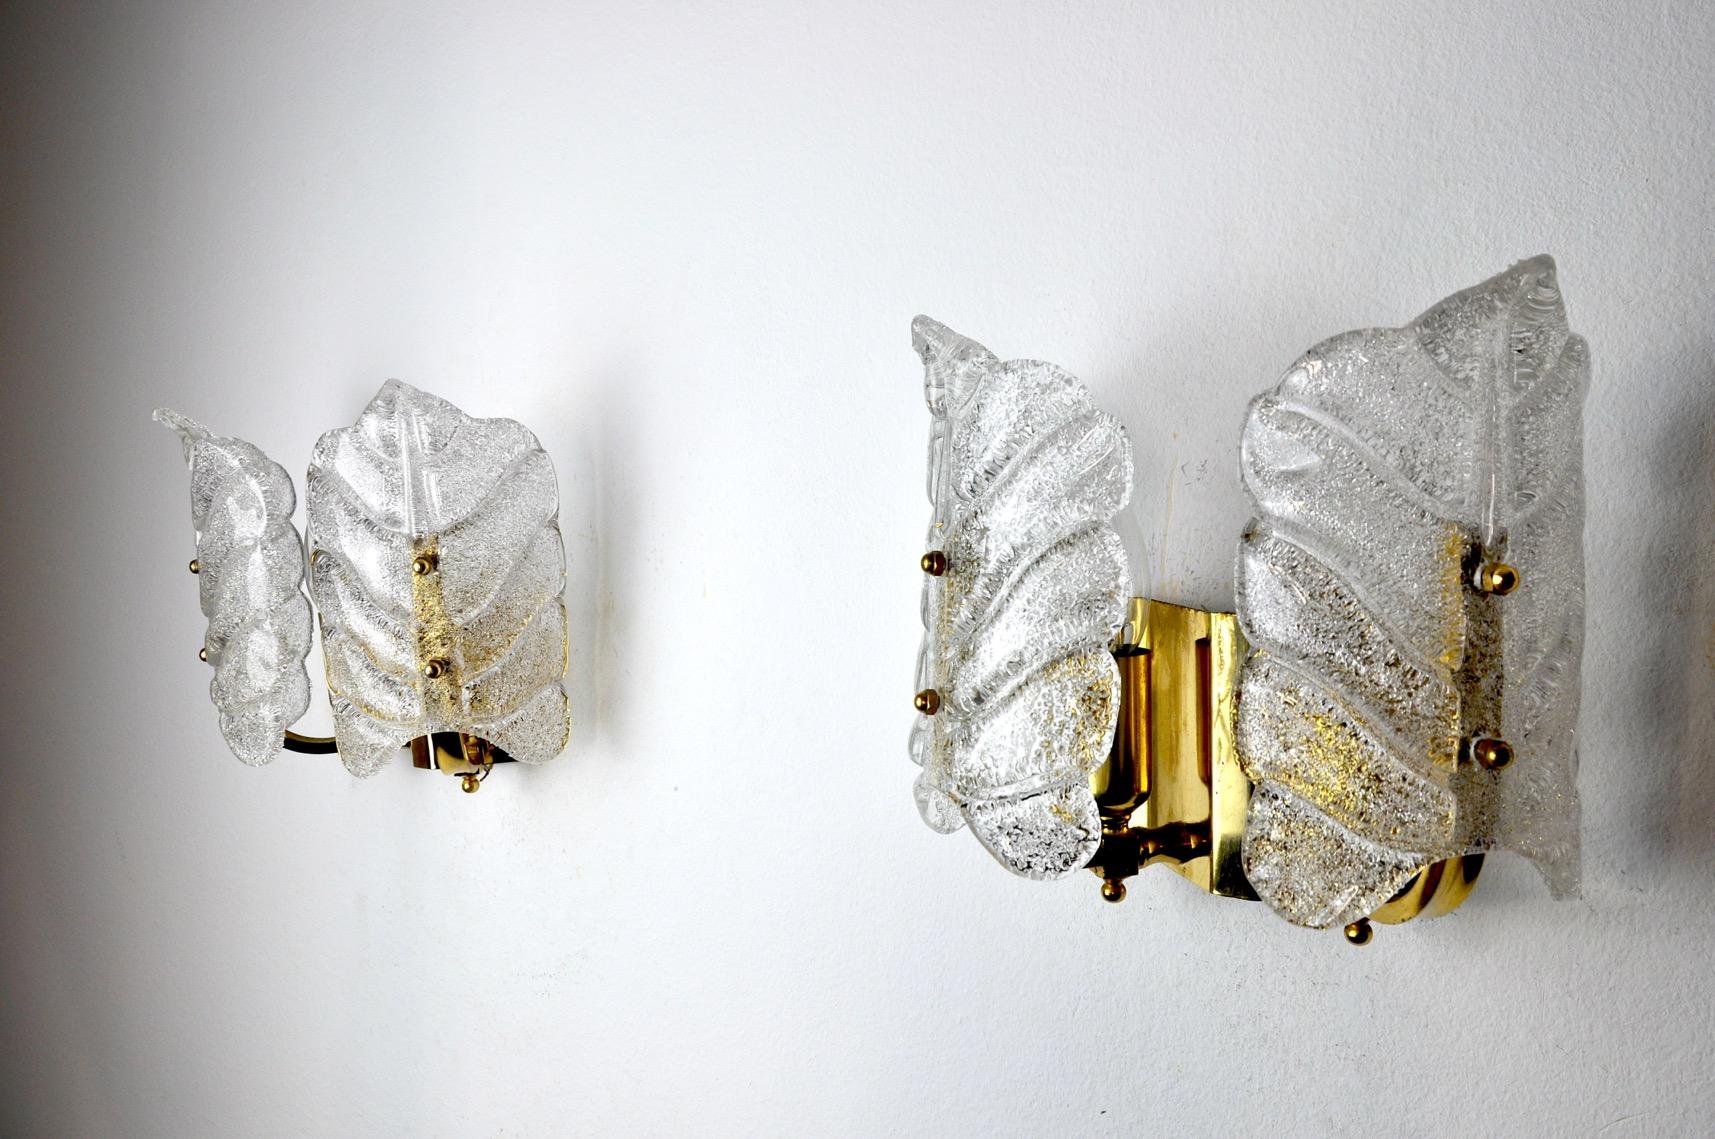 Very nice pair of leaf-shaped sconces, murano, designed and produced in Italy in the 70s. The sconces have a gilded metal structure and leaf-shaped frosted glass. The diffused light is soft and harmonious, perfect for illuminating your interior.